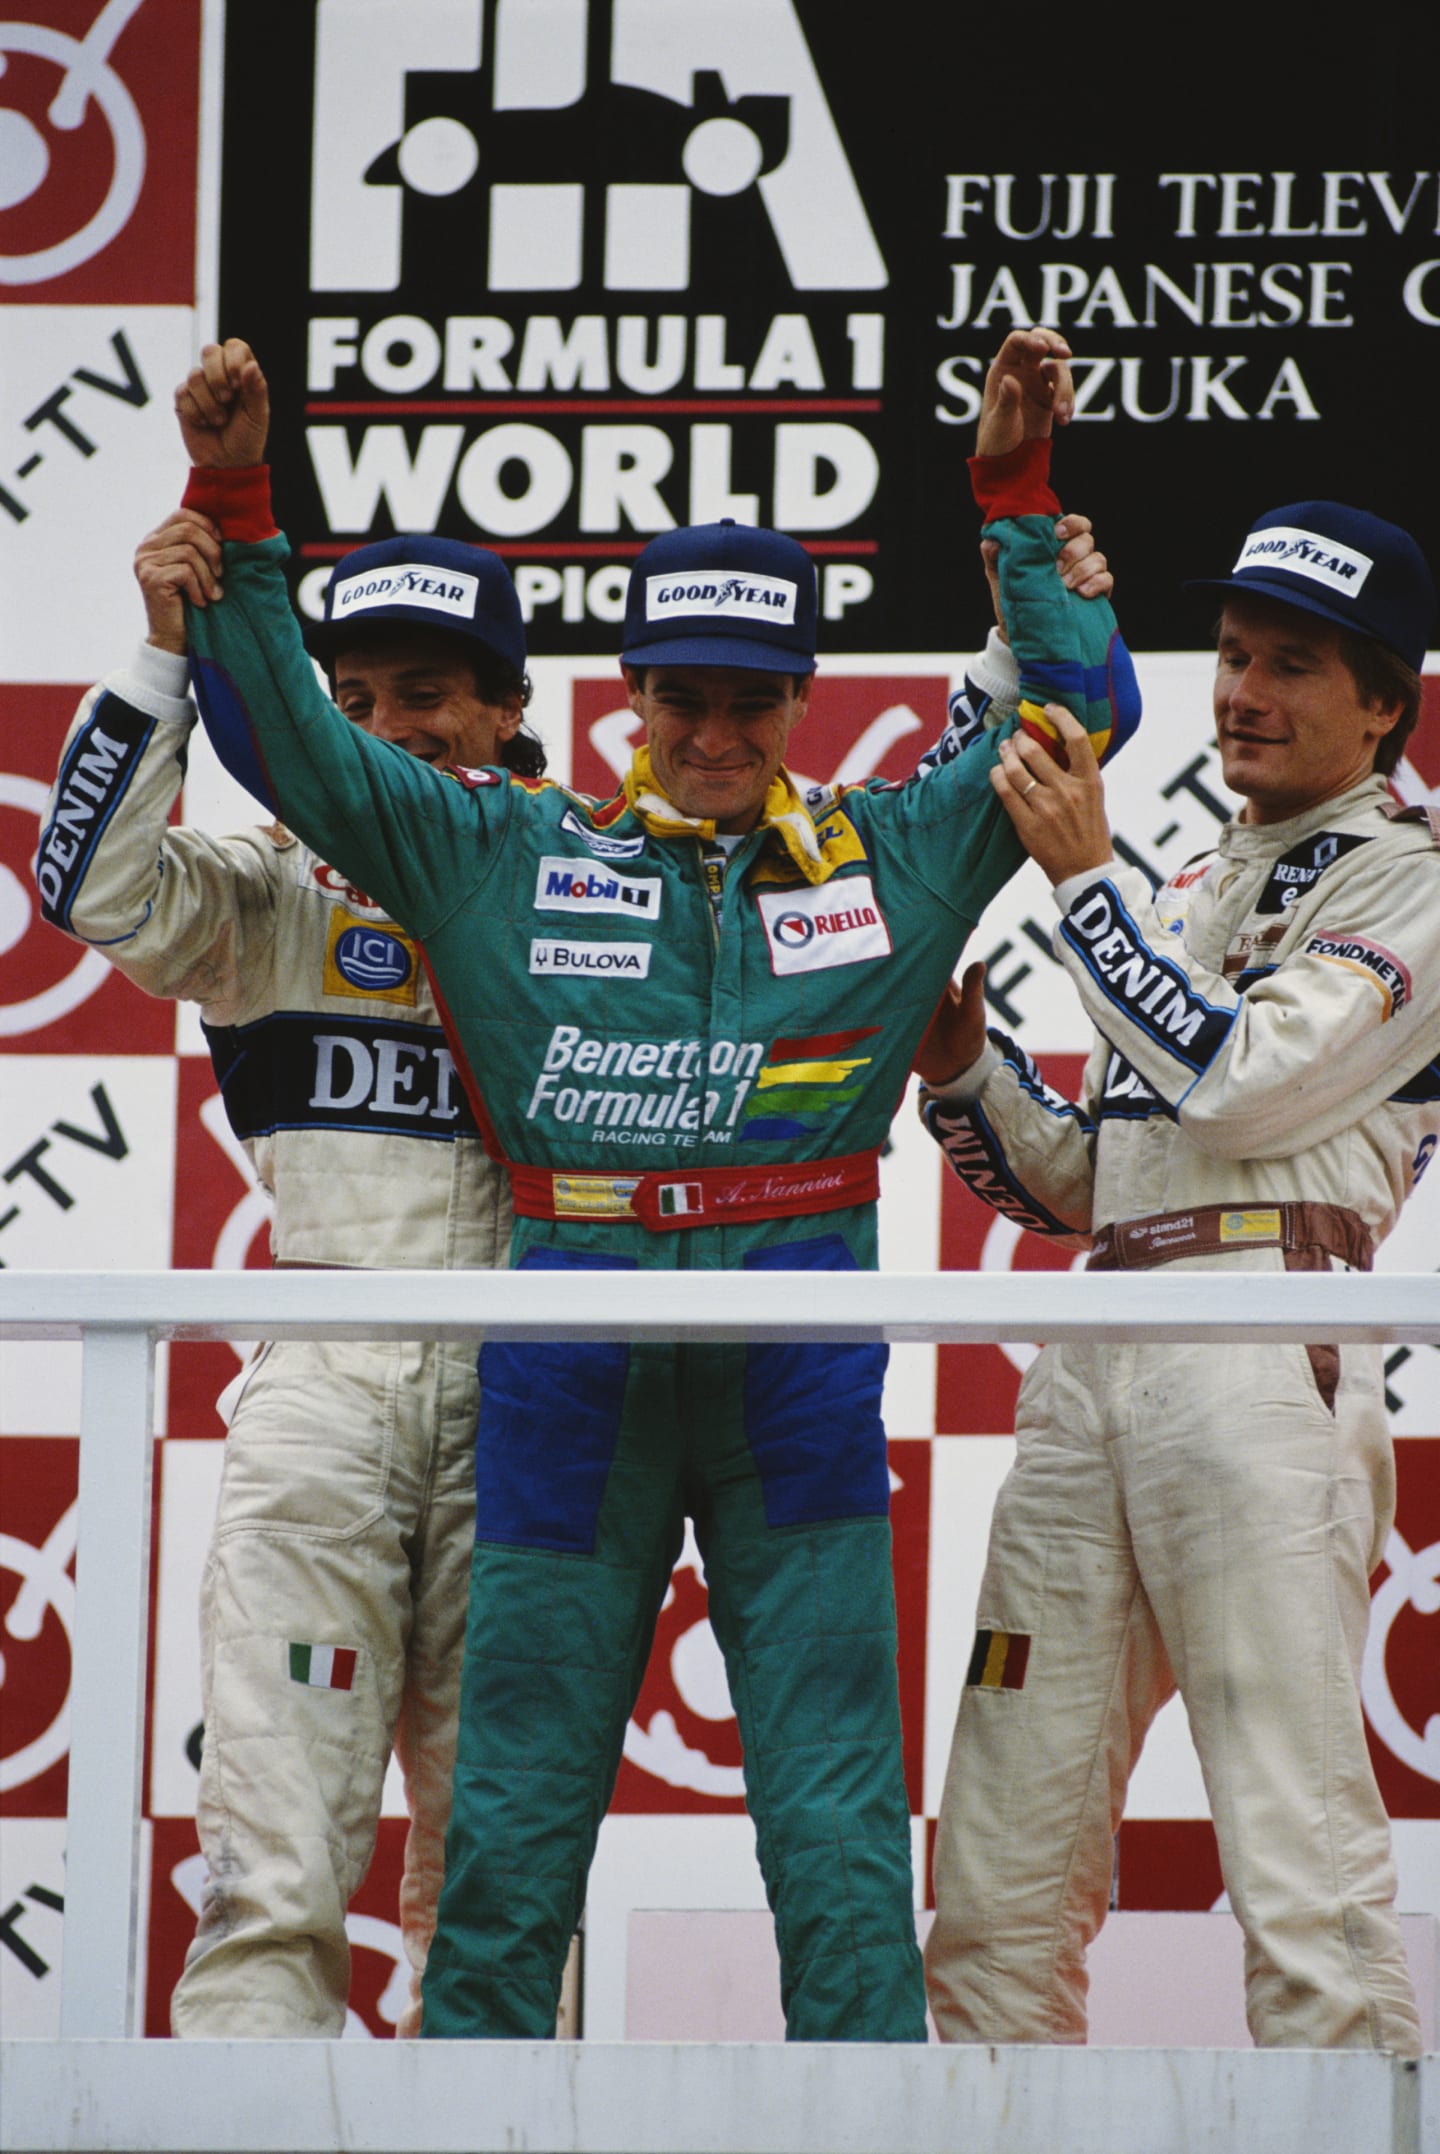 Alessandro Nannini of Italy (C) and driver of the #19 Benetton Formula Ltd Benetton B189 Ford